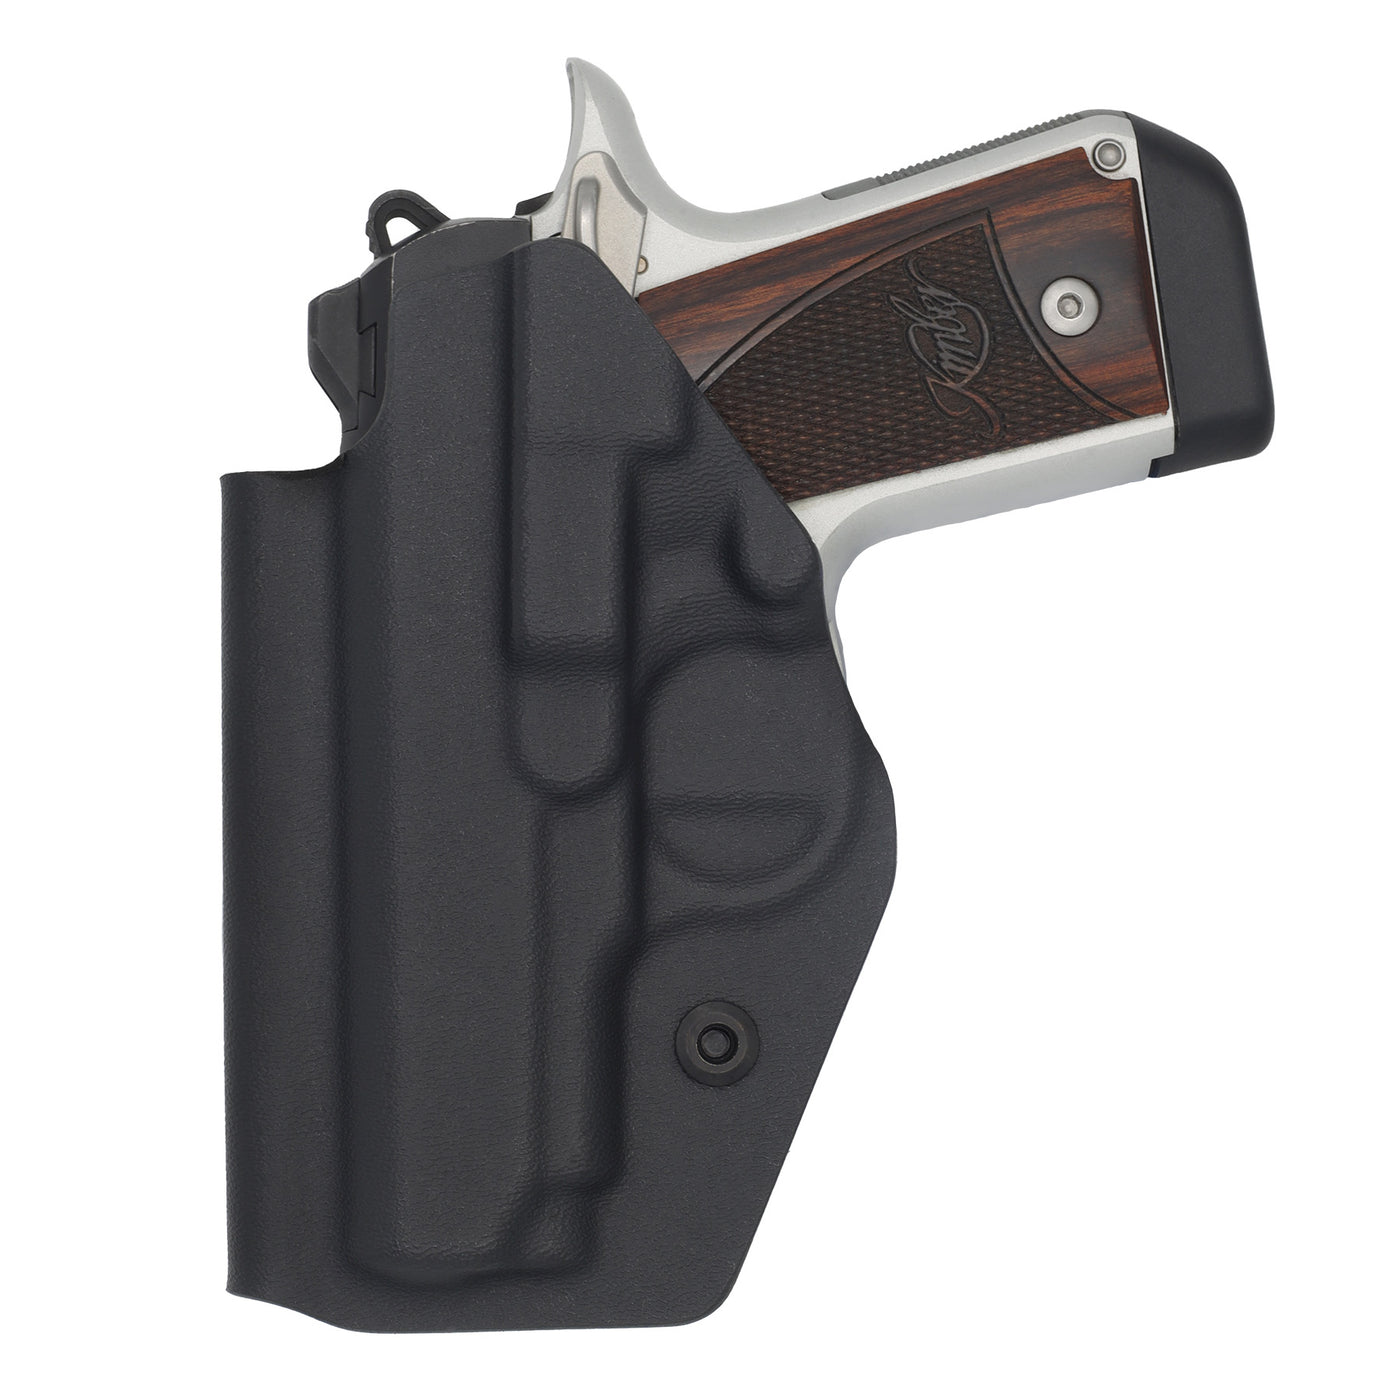 C&G Holsters Covert inside the waistband kydex holster for Kimber Micro 380 in black rear view